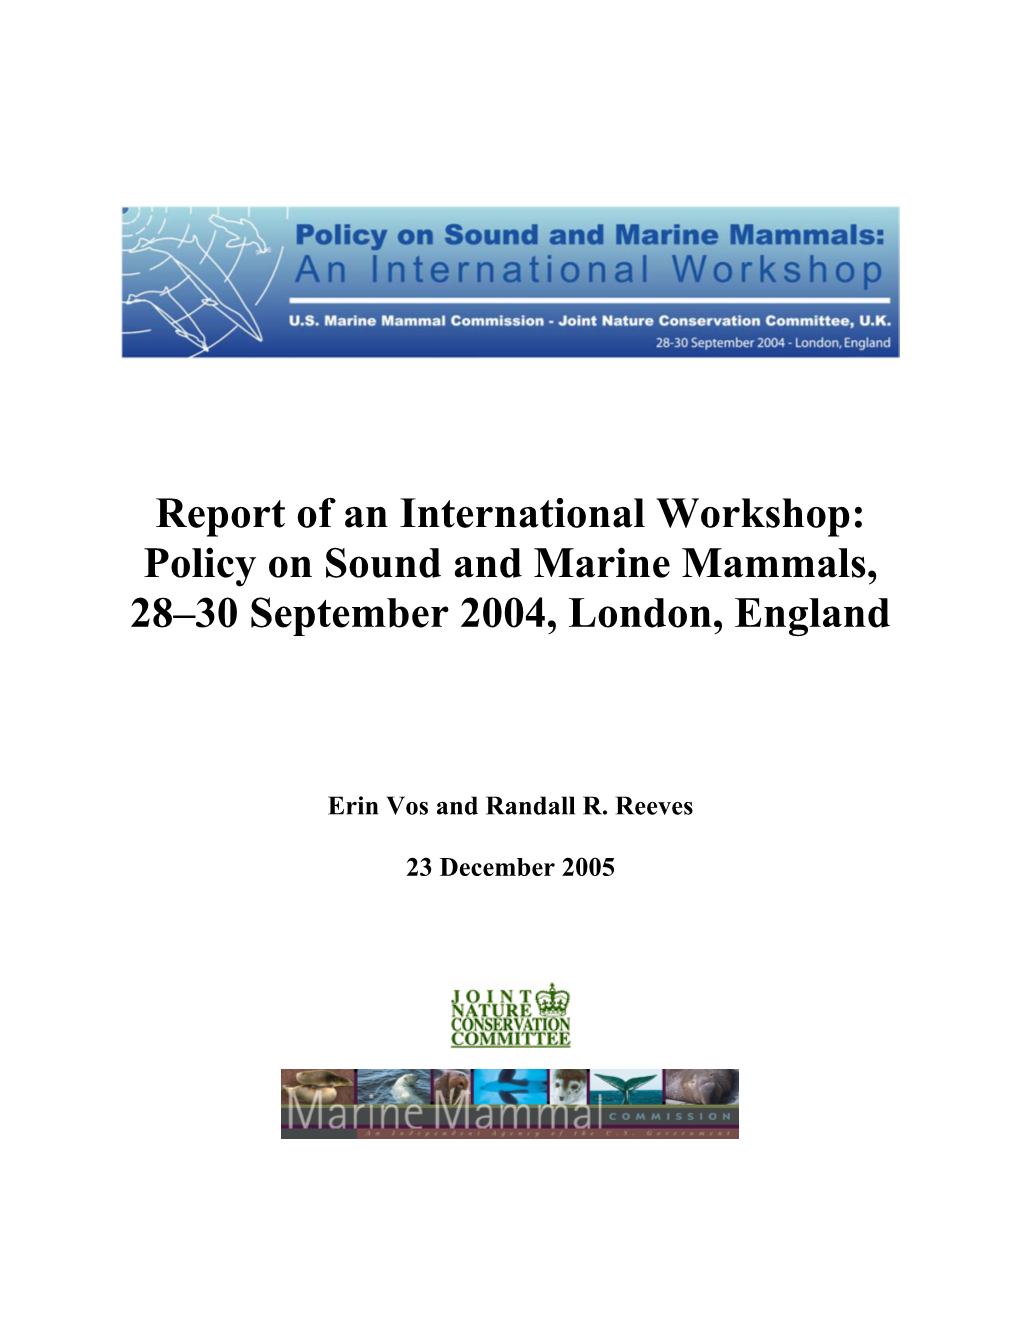 Report of an International Workshop: Policy on Sound and Marine Mammals, 28–30 September 2004, London, England